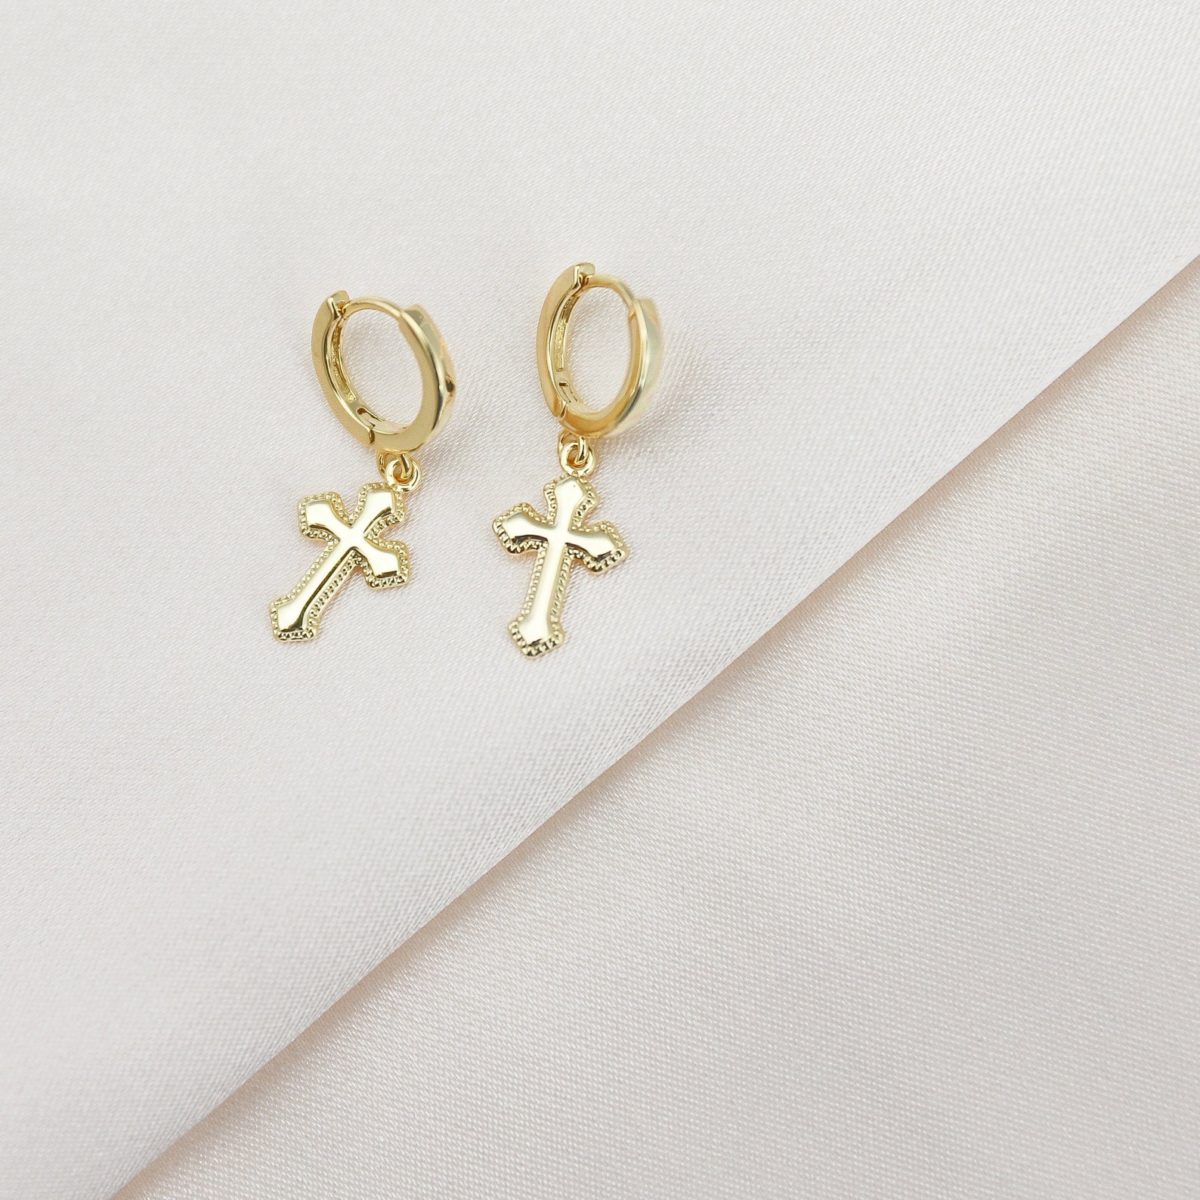 discover the perfect pair of cross earrings